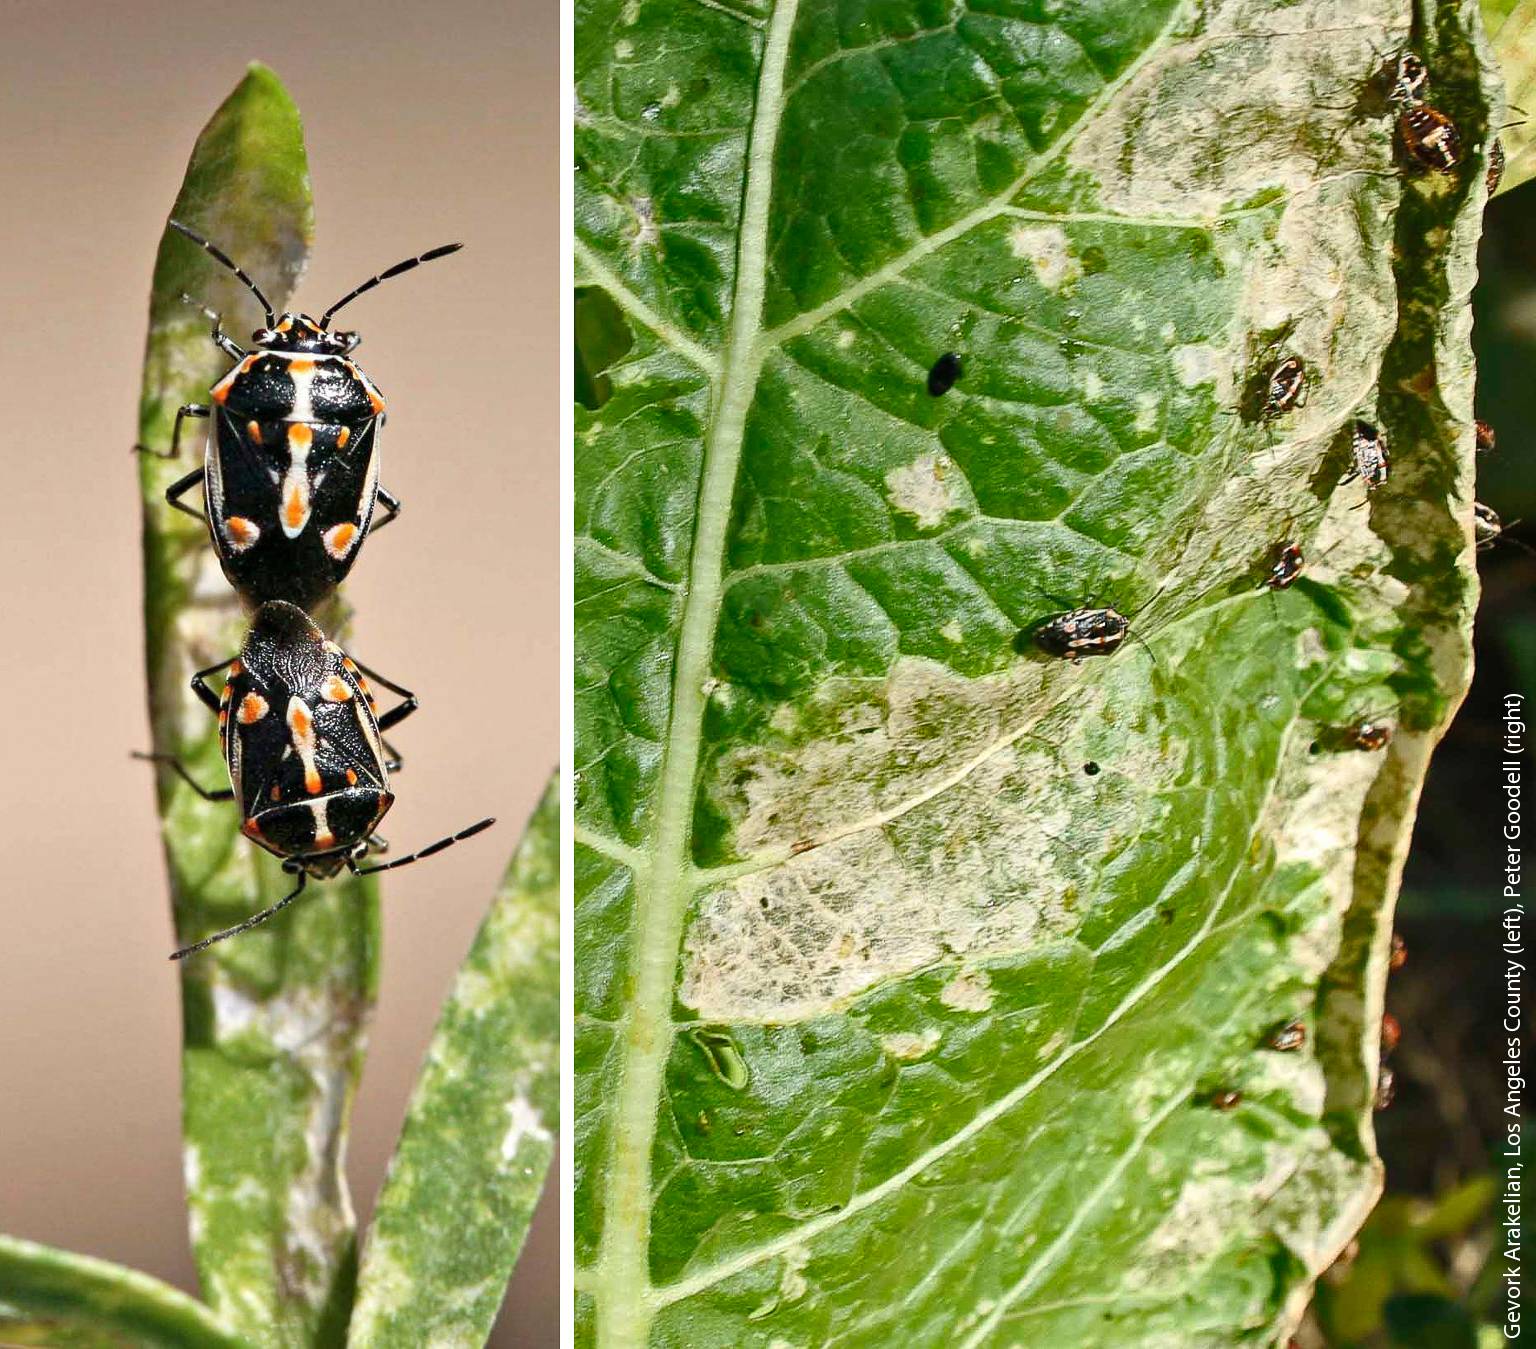 Over 40% of the pests for which UC IPM has guidelines were invaders that accompanied the movement of people, food or plant material into California. Bagrada bug (Bagrada hilaris), an invasive pest species native to Africa, attacks vegetable crops and ornamental plants. It was first found in Los Angeles County in 2008, and since then has spread north to 19 counties.